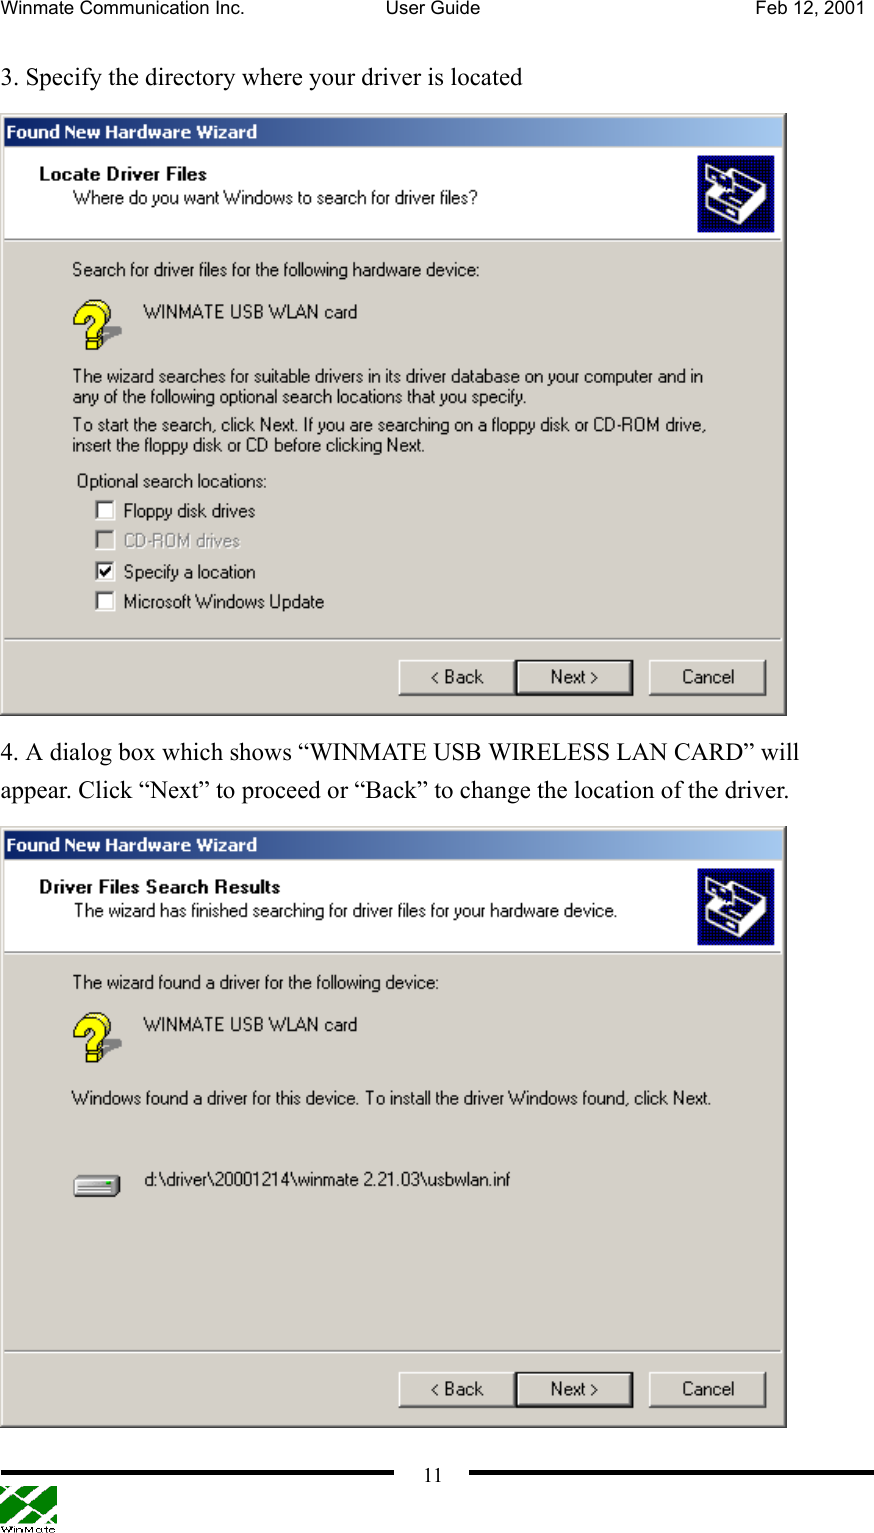 Winmate Communication Inc.  User Guide  Feb 12, 2001    11 3. Specify the directory where your driver is located  4. A dialog box which shows “WINMATE USB WIRELESS LAN CARD” will appear. Click “Next” to proceed or “Back” to change the location of the driver.    